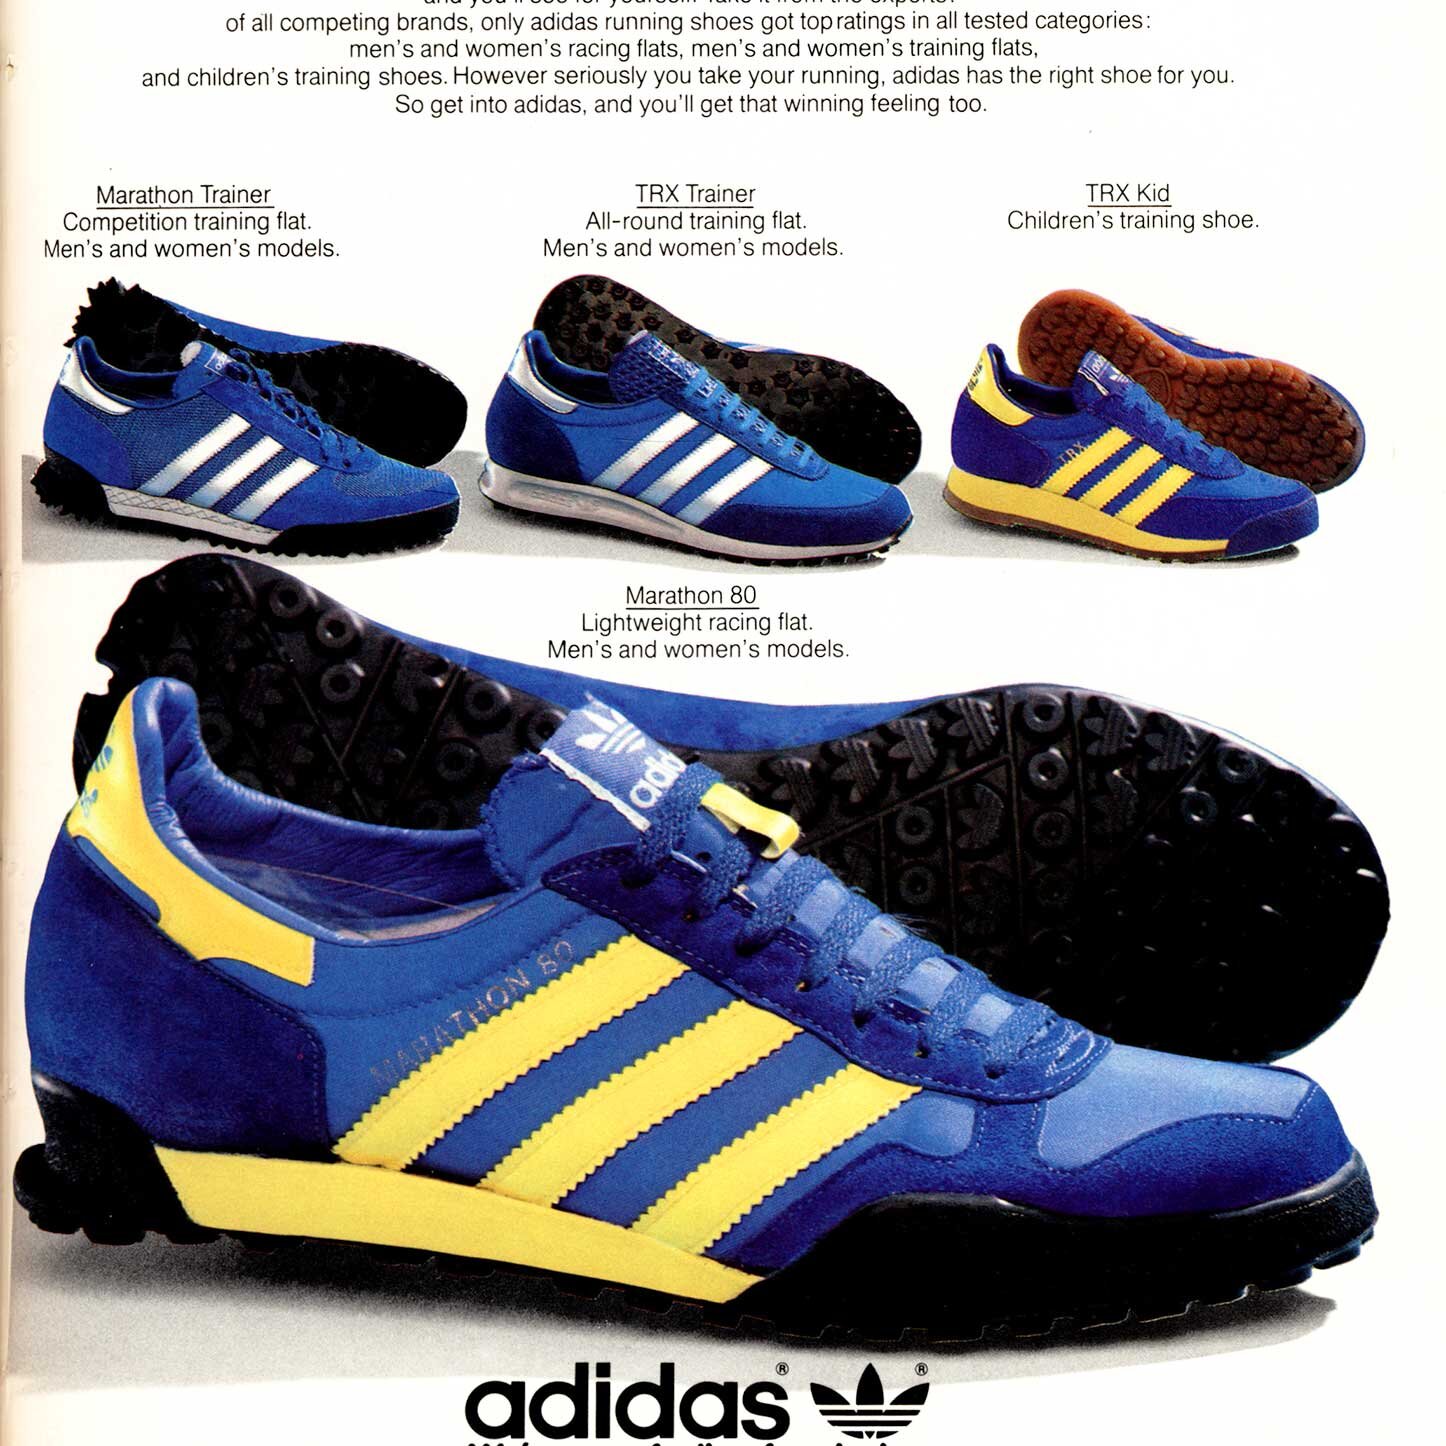 The Deffest®. A vintage and retro sneaker — adidas Marathon and TRX 1980 vintage sneaker ad